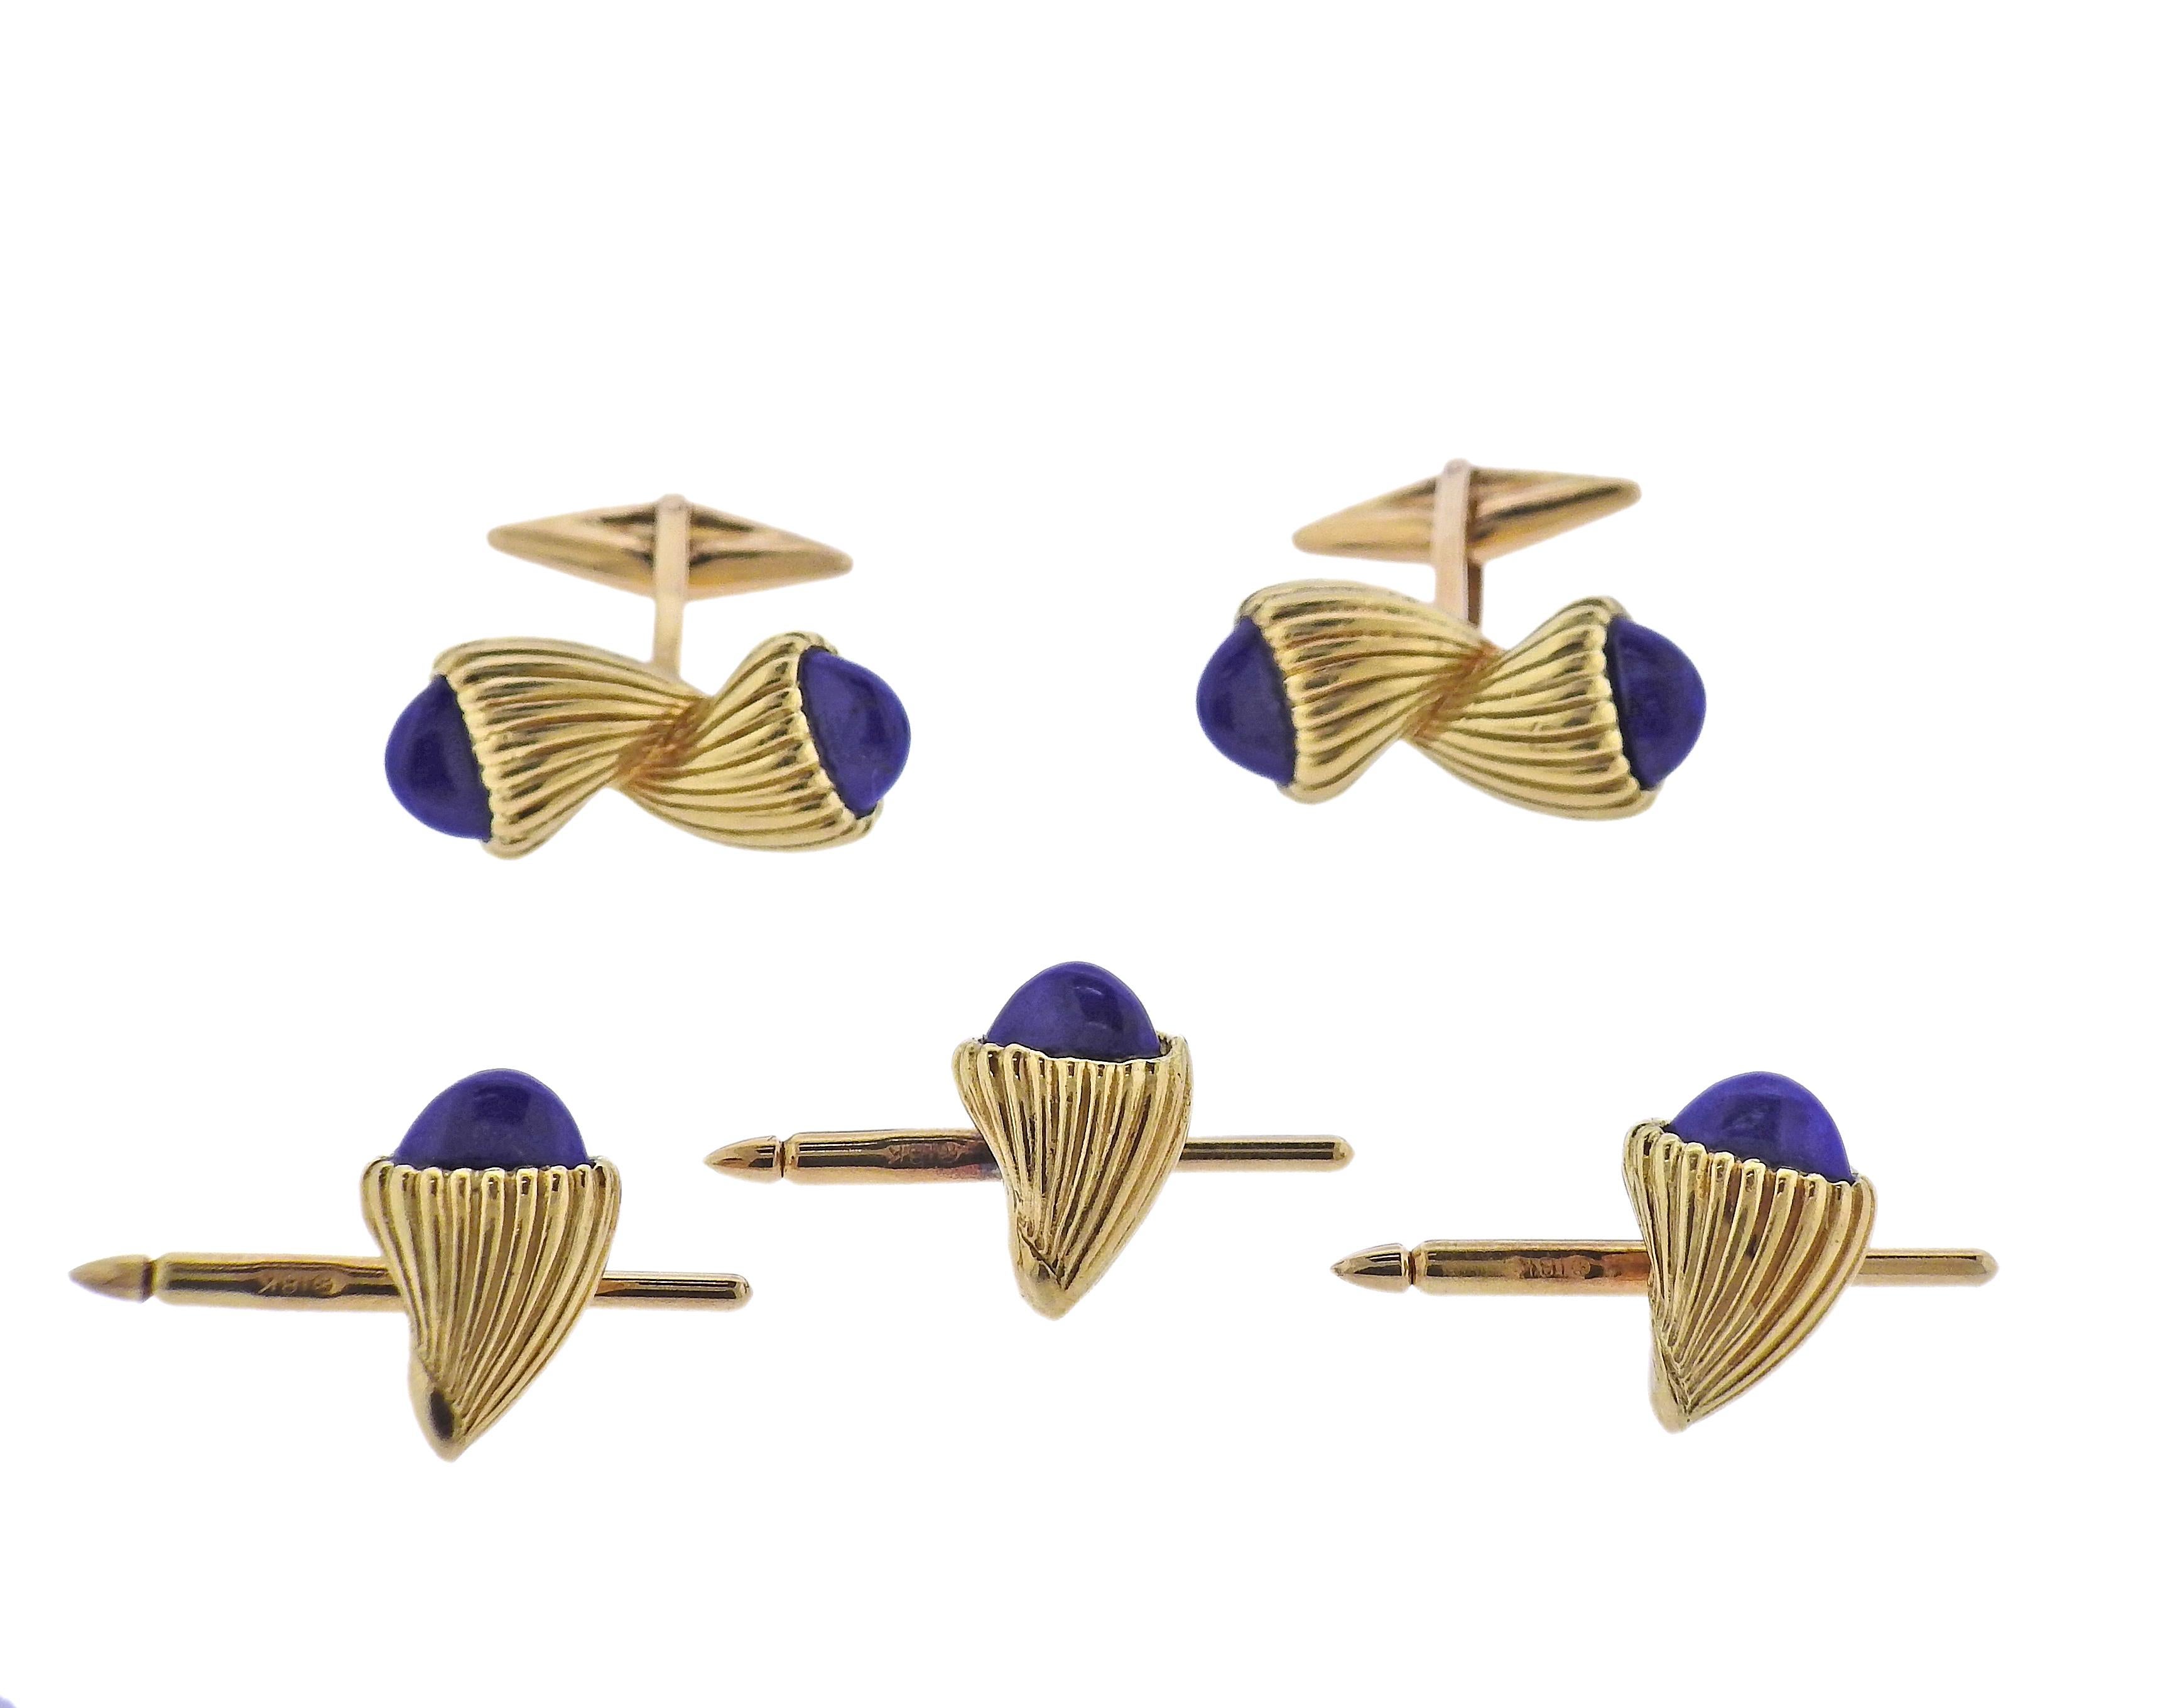 1970s 18k gold cufflinks and studs set by Aldo Cipullo, with lapis lazuli. Cufflink top is 25 x 10mm, stud is 15 x 11mm. Weight - 34.3 grams. Marked: Cipullo, 18k. 